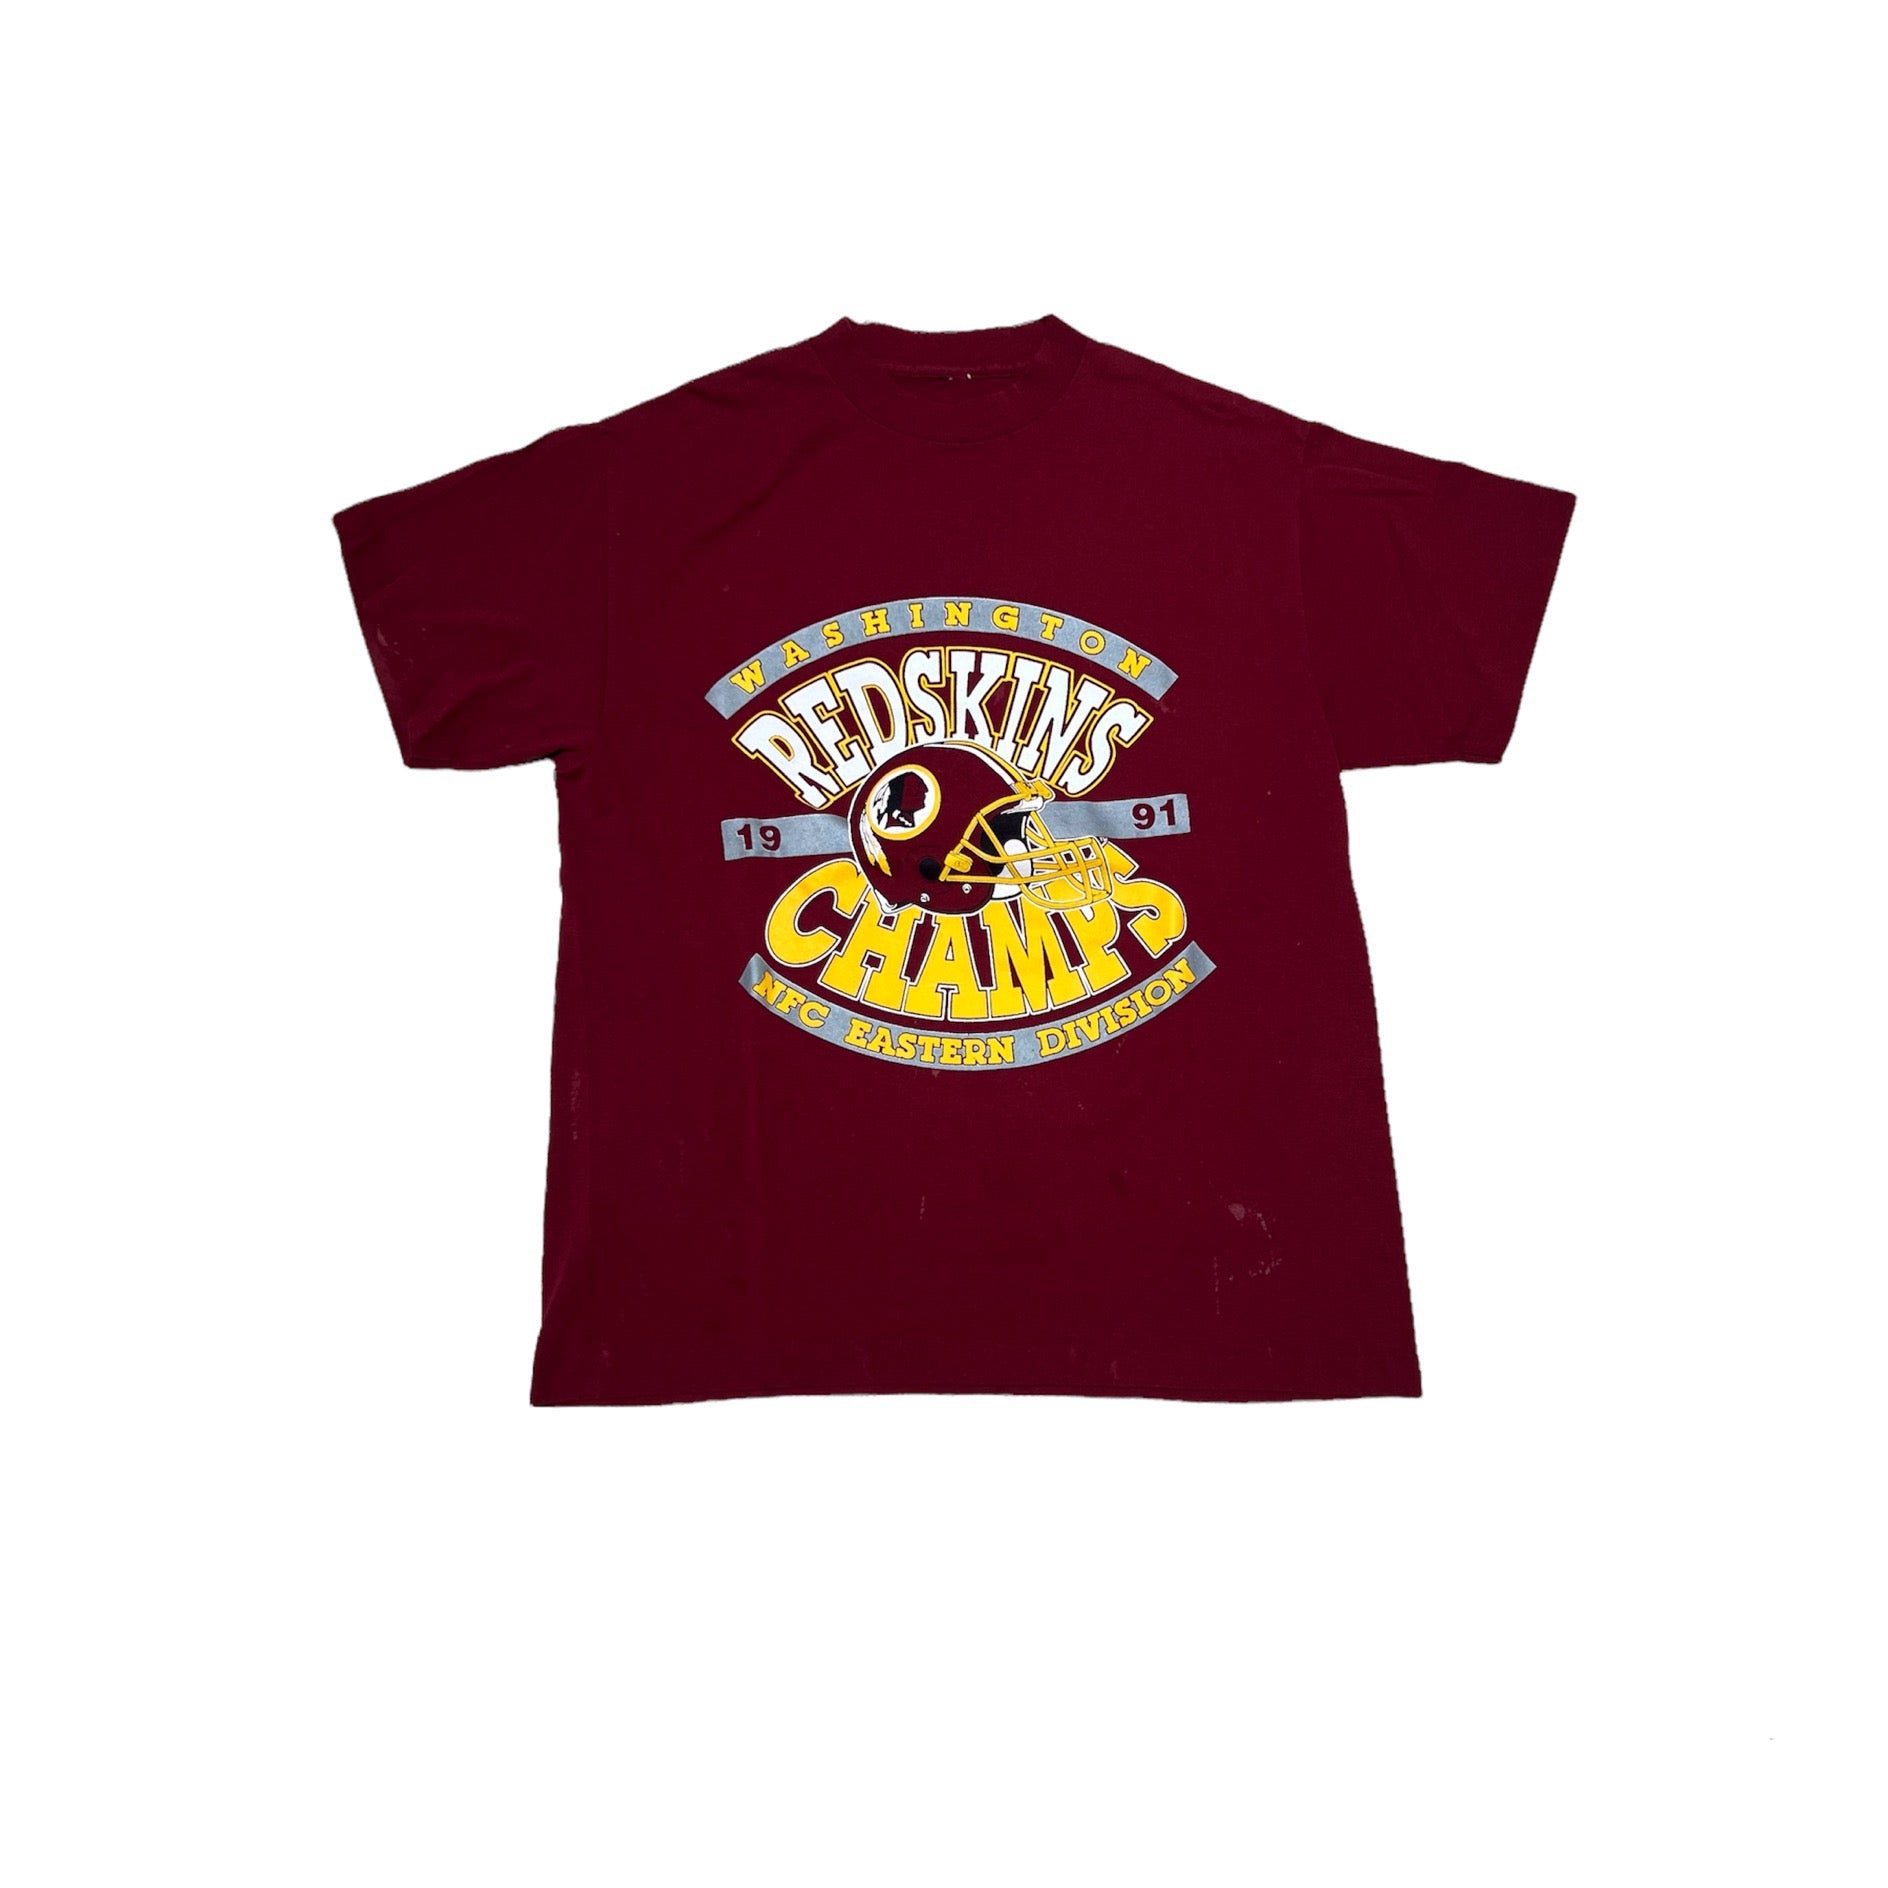 1991 WASHINGTON REDSKINS NFC EAST DIVISION CHAMPS TEE